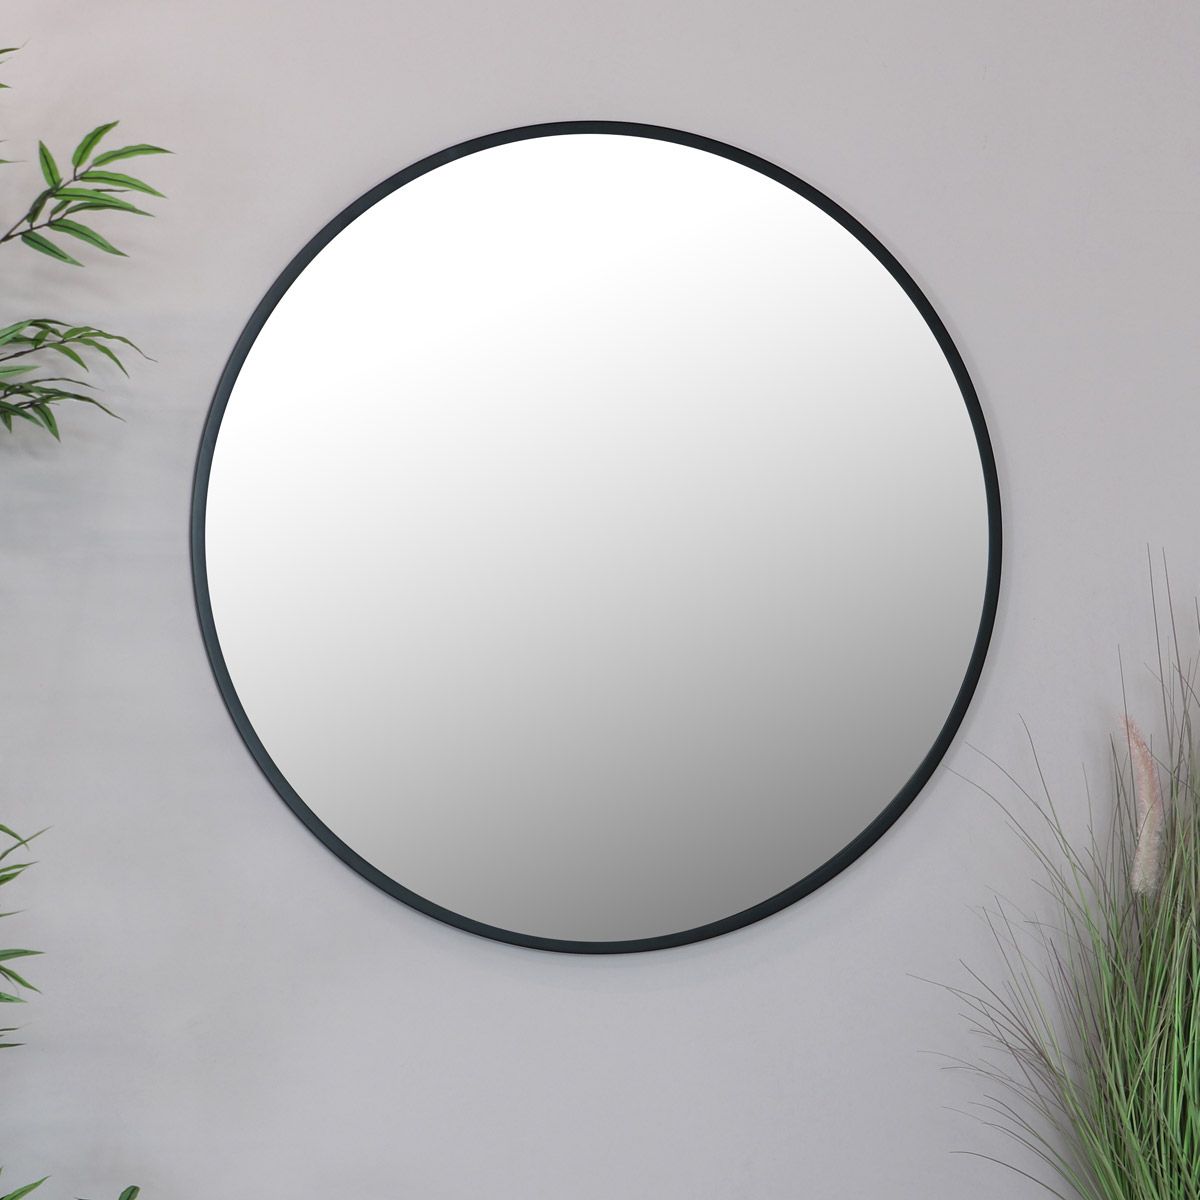 Best And Newest Round Black Wall Mirror 80cm X 80cm With Regard To Shiny Black Round Wall Mirrors (View 8 of 15)